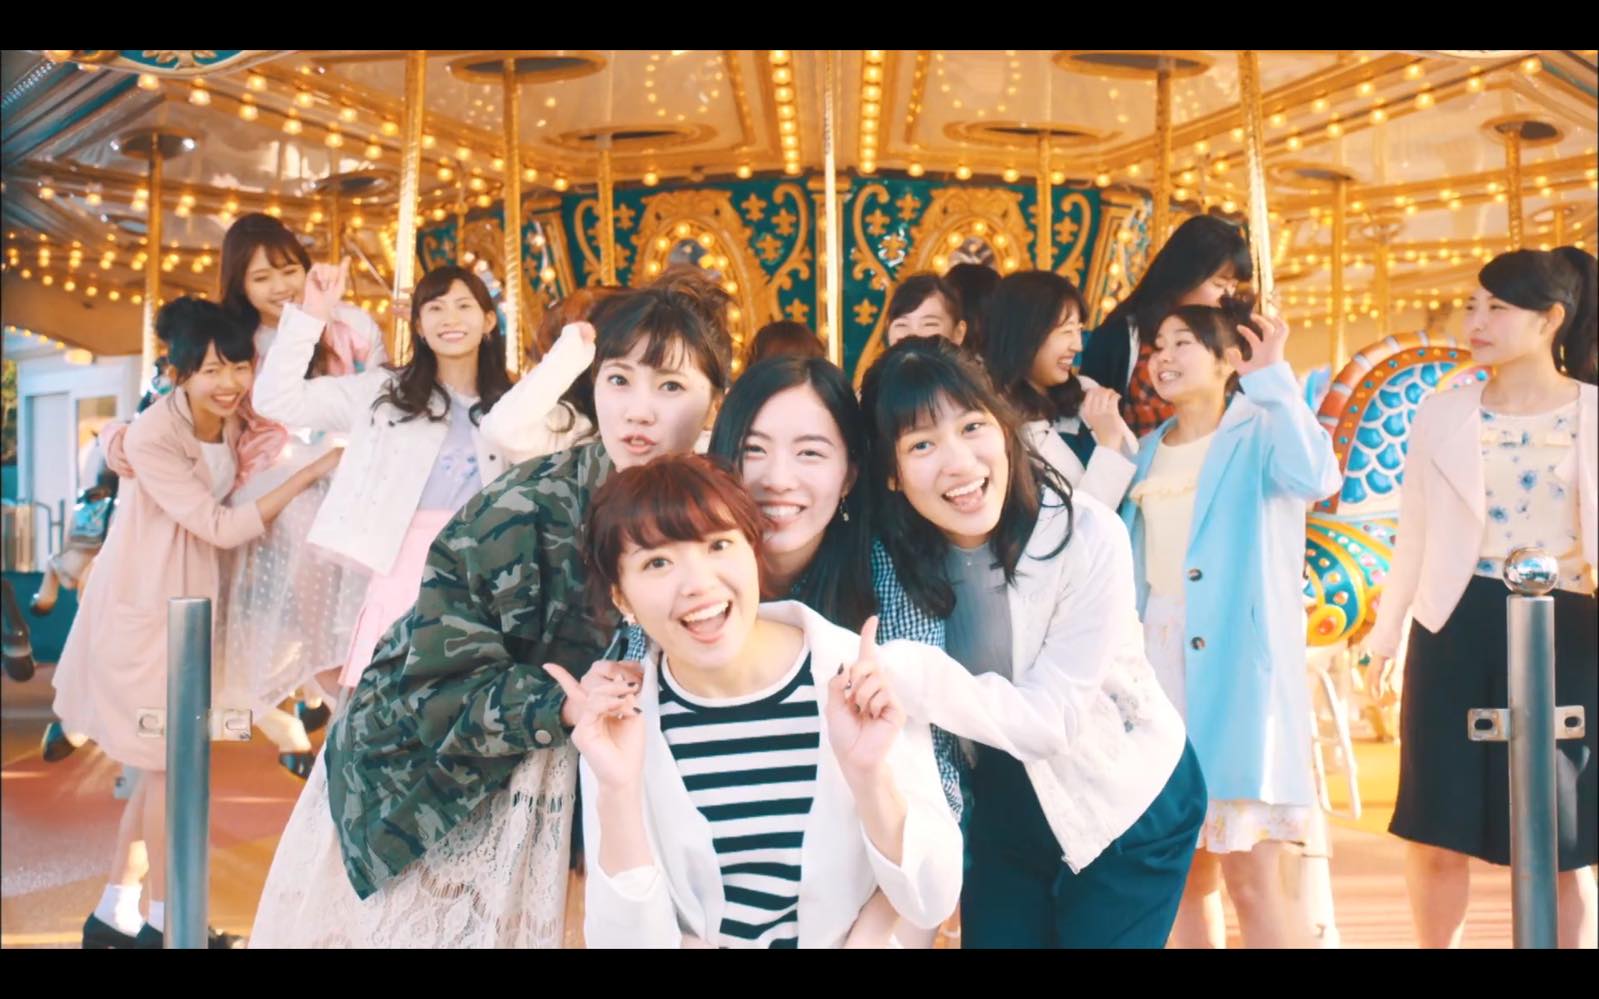 Girls Day Out! Net Celebrity Spotting! Stalker Hunting! SKE48 Team Song Preview MVs From19th Single Out Now!